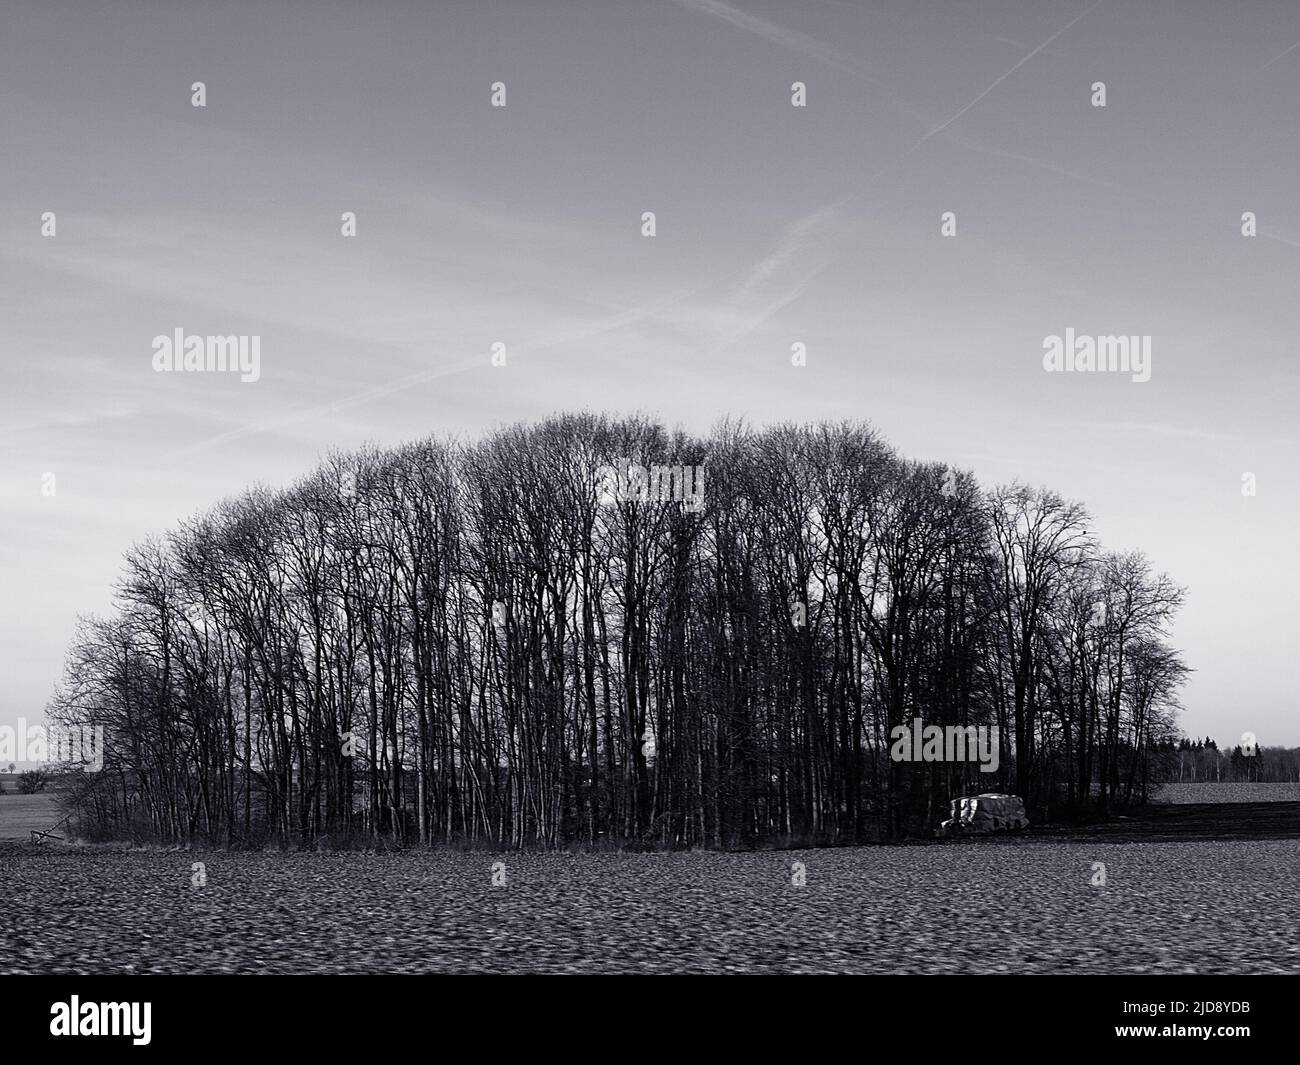 Group of trees in winter season shot in black and white Stock Photo